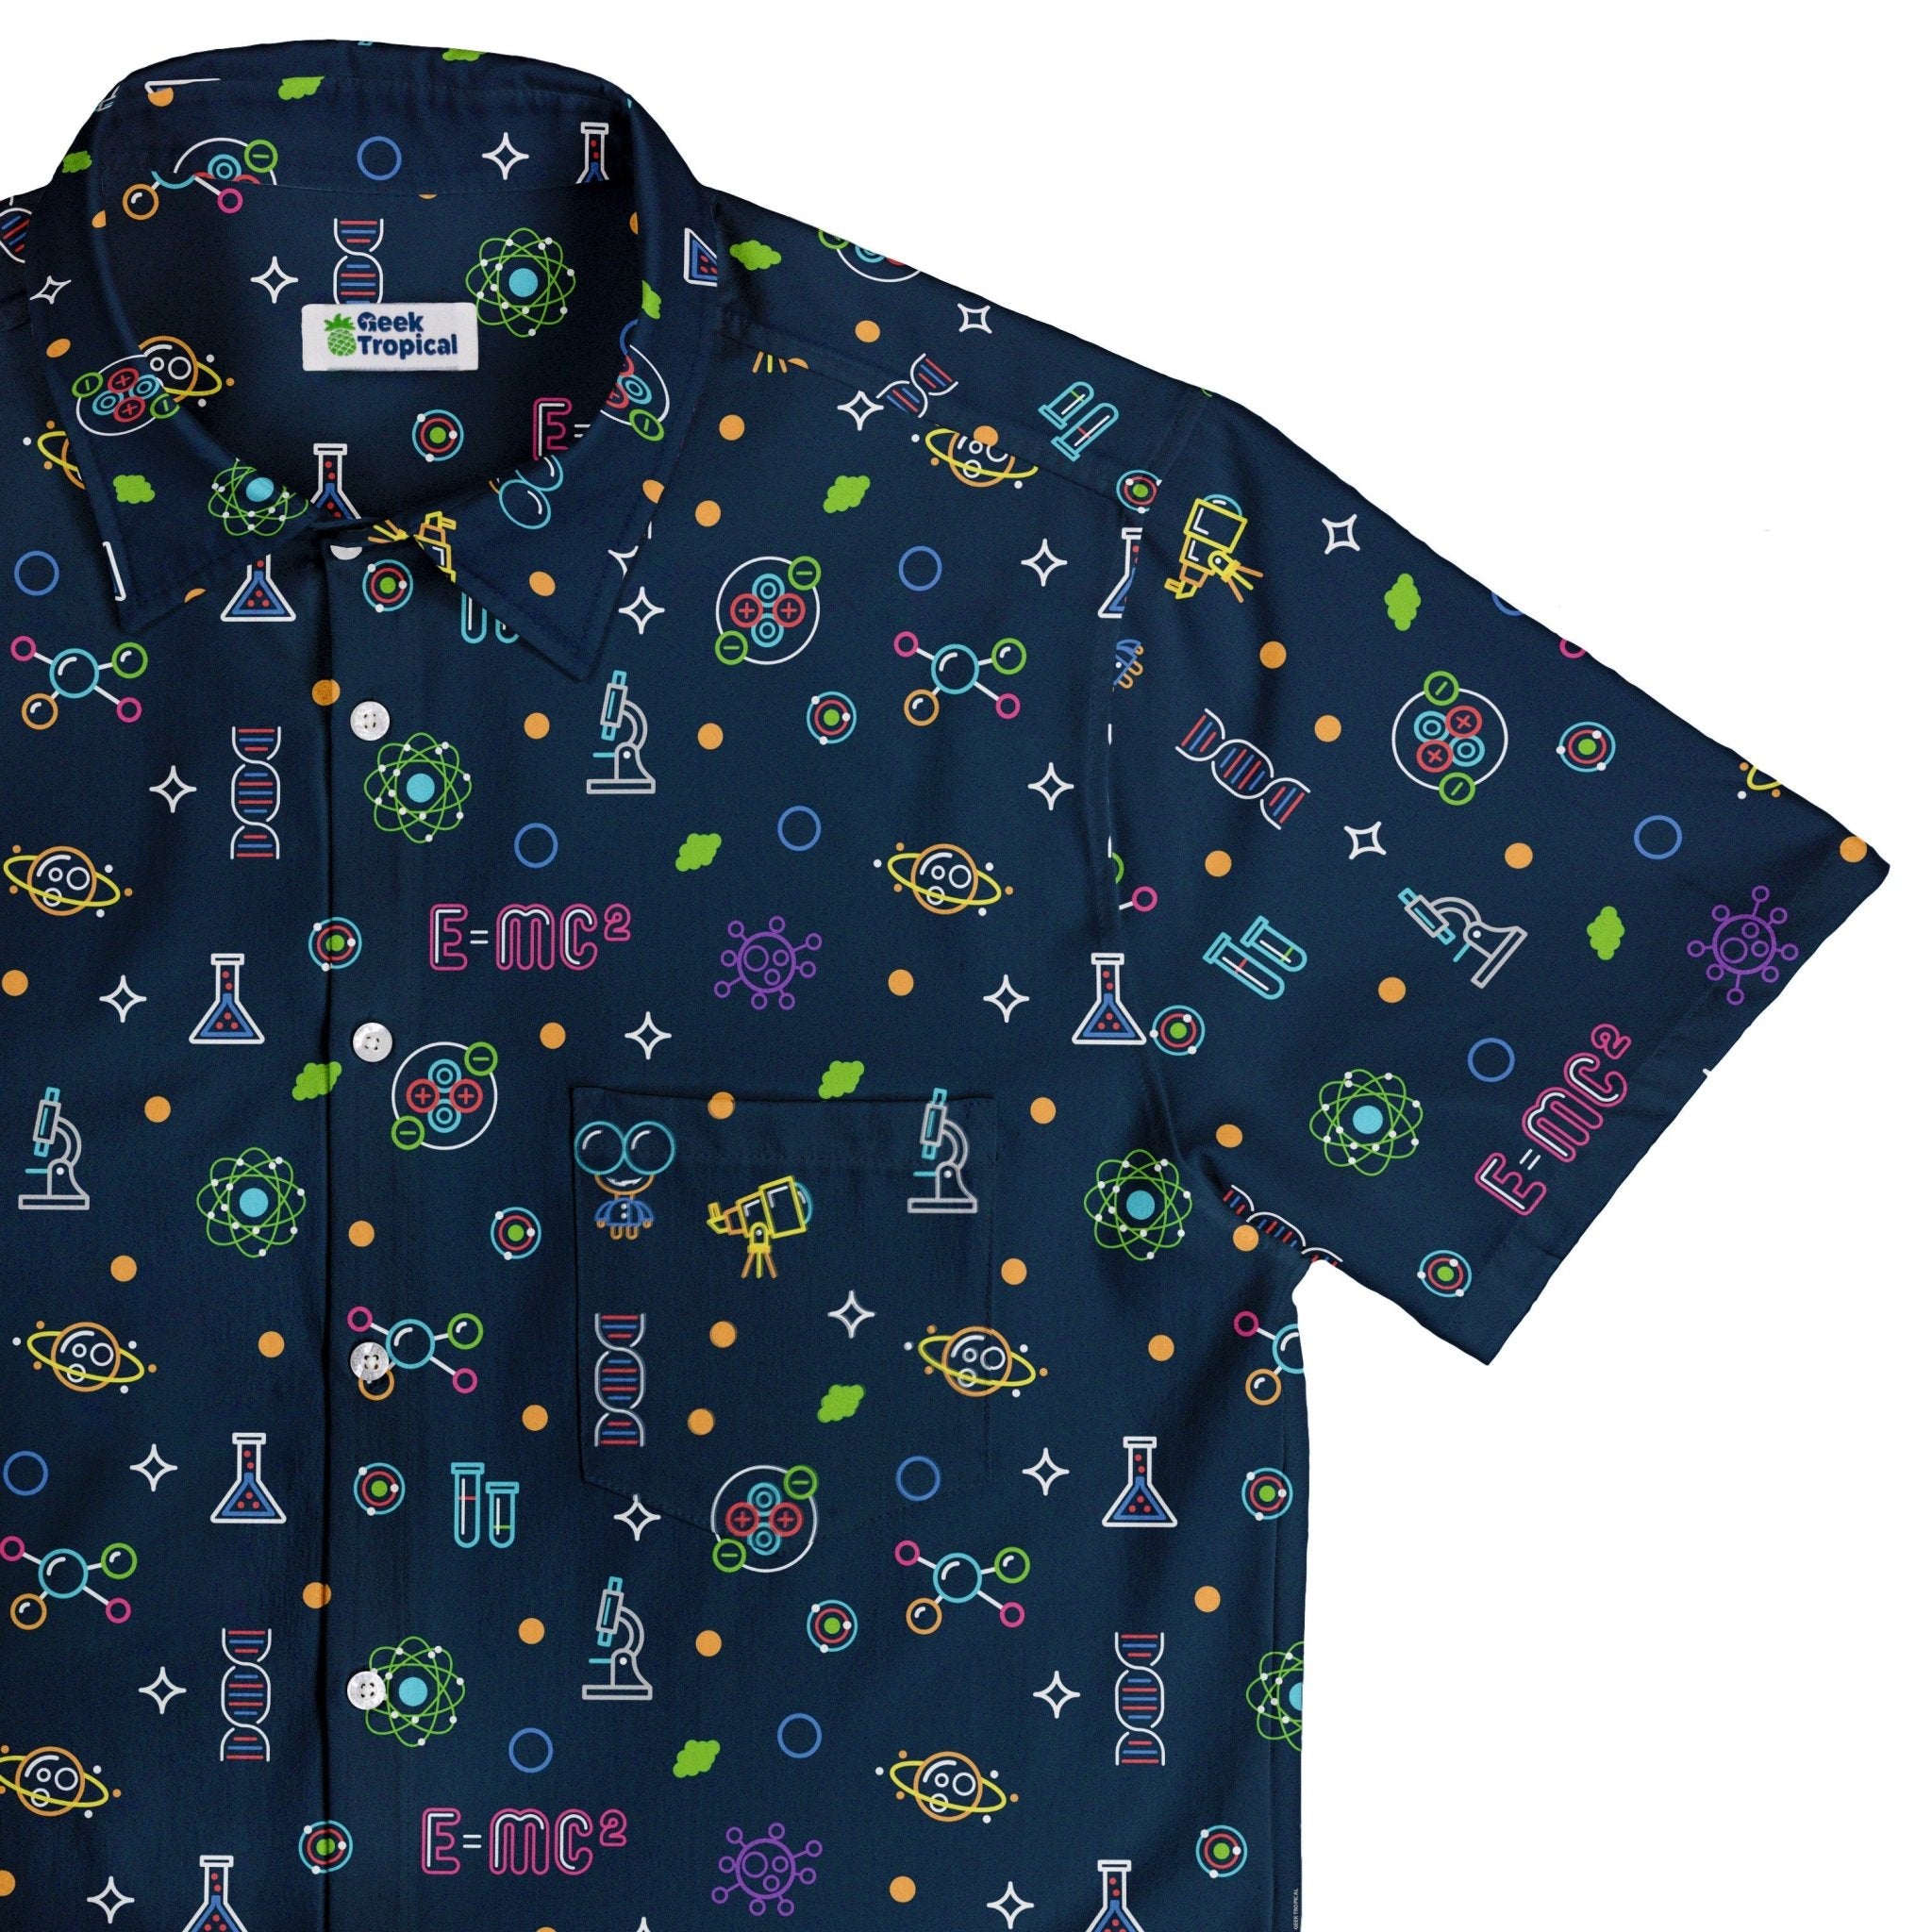 Science DNA Molecules Dark Navy Button Up Shirt - adult sizing - science print -